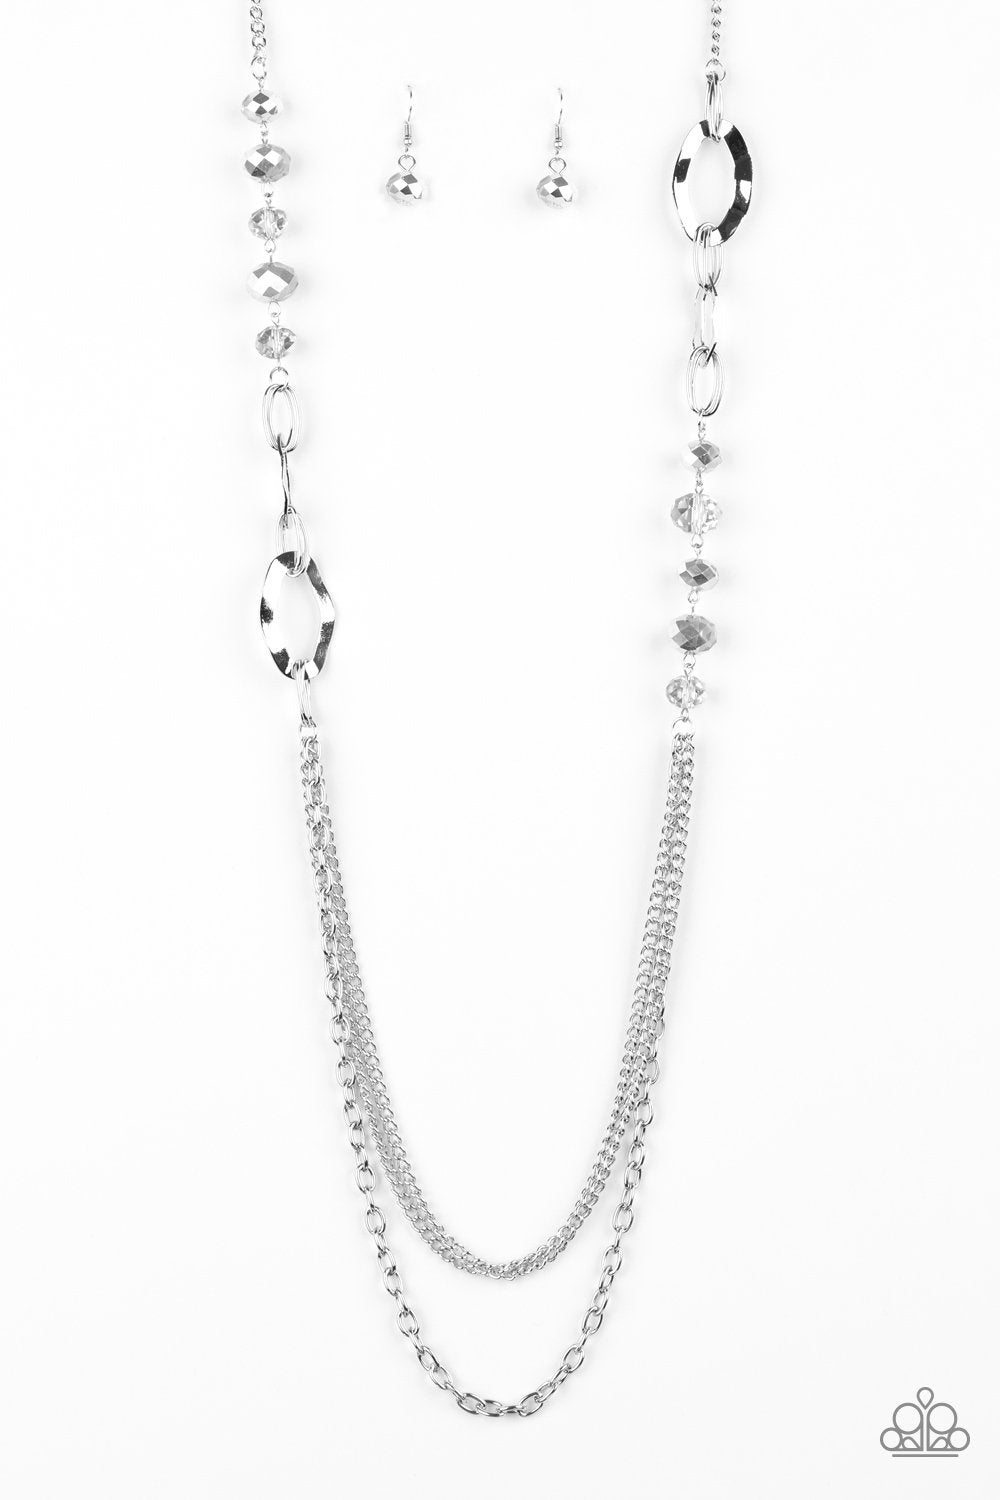 Modern Girl Glam Silver Necklace - Paparazzi Accessories- lightbox - CarasShop.com - $5 Jewelry by Cara Jewels